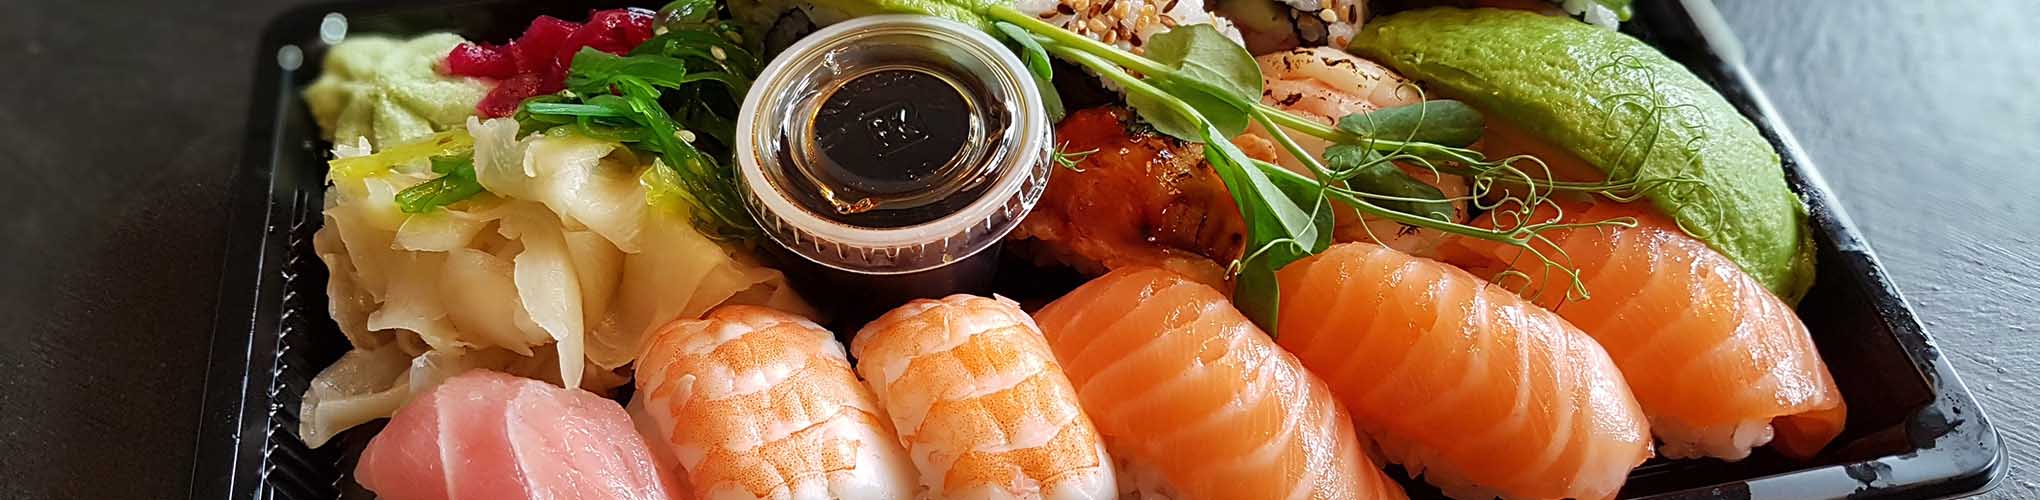 Saya Sushi | Home delivery | of classic sushi dishes ...